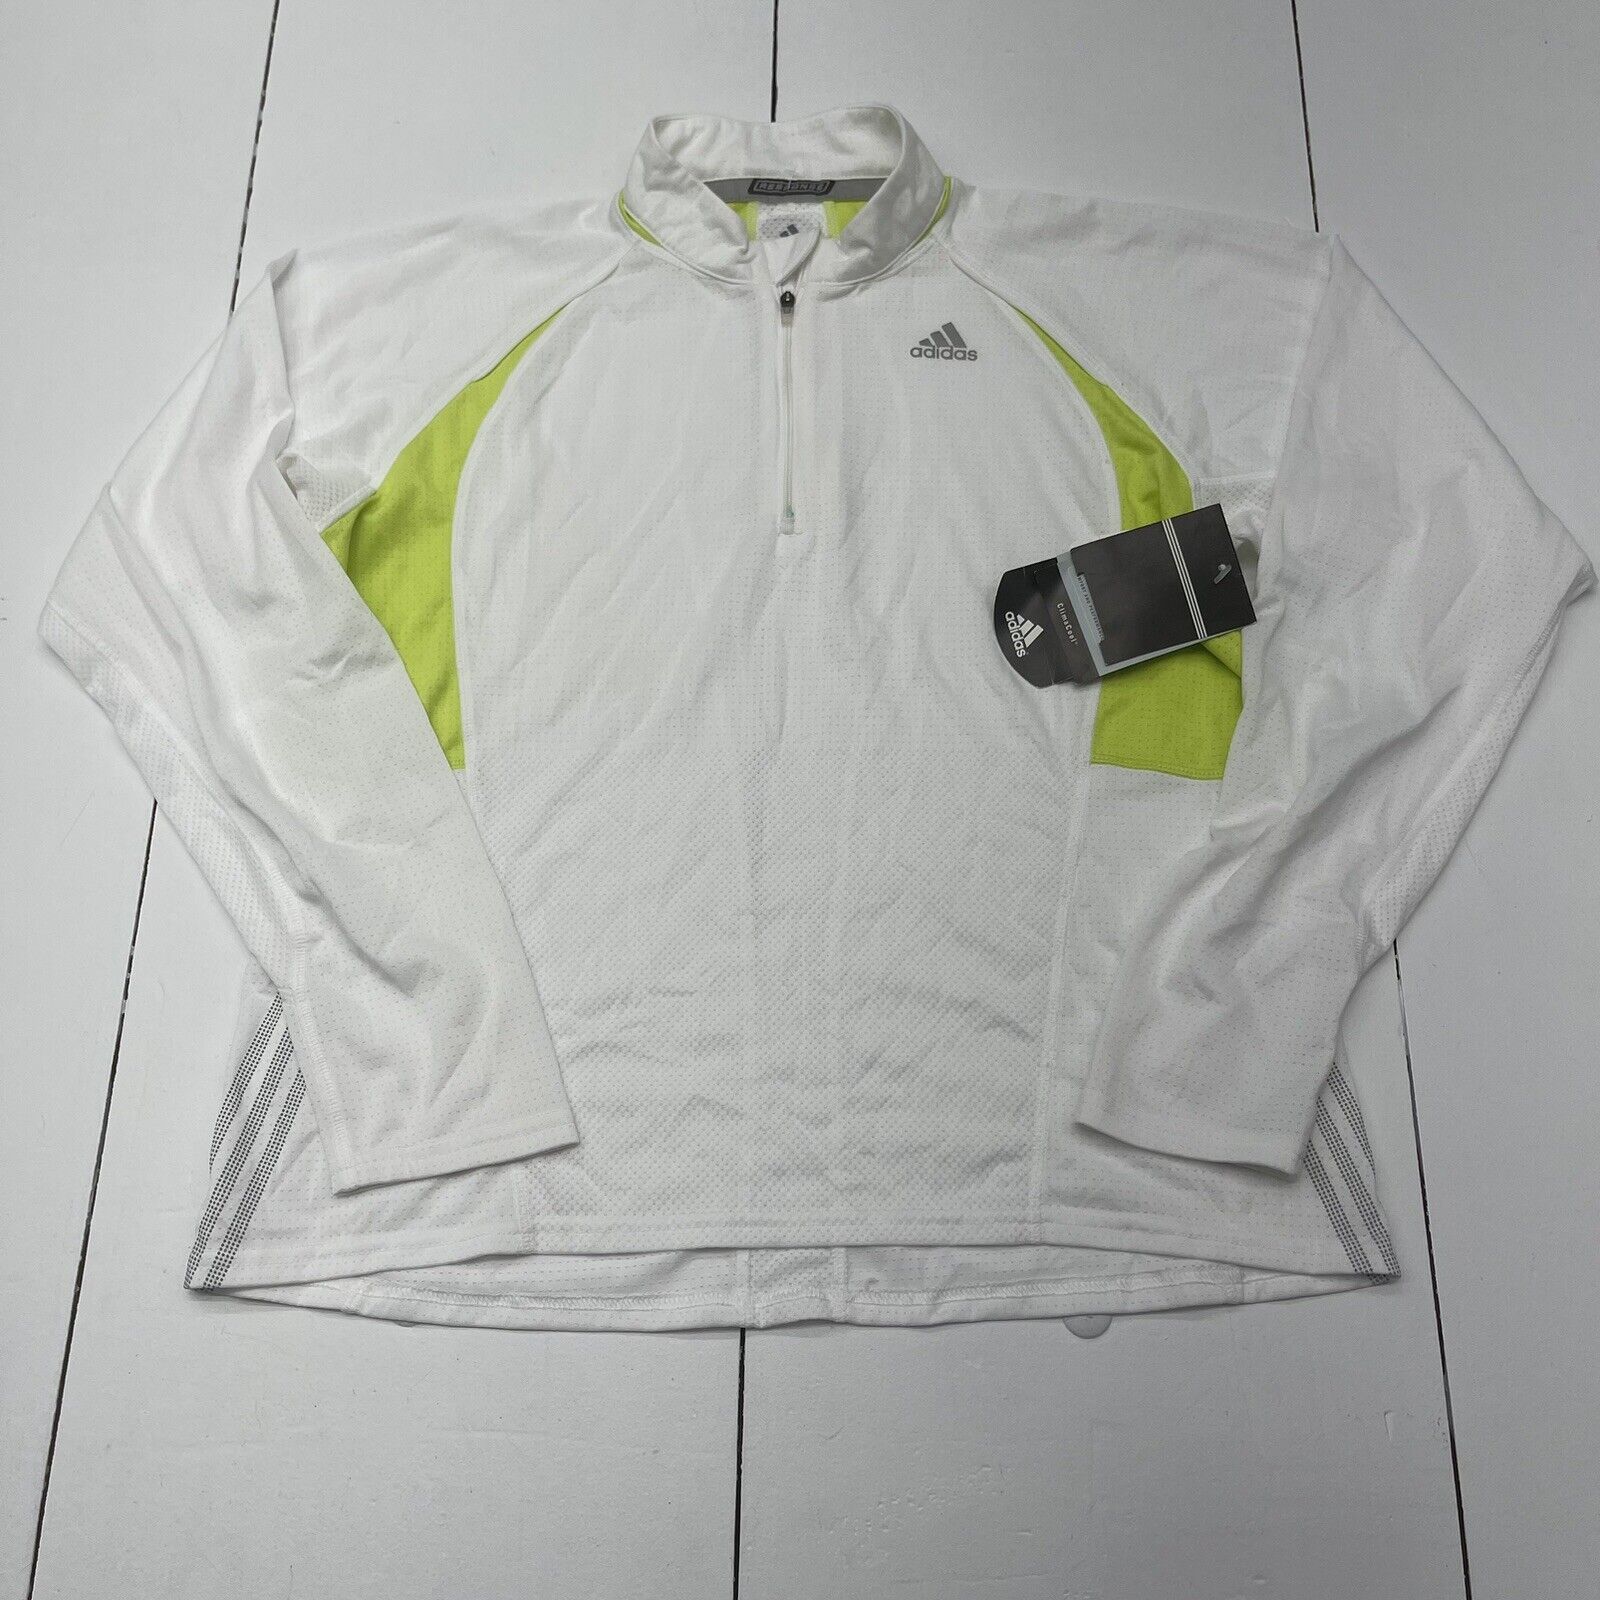 Adidas Climacool Response White green Long Sleeve 1/4 Zip Athletic Top - exchange